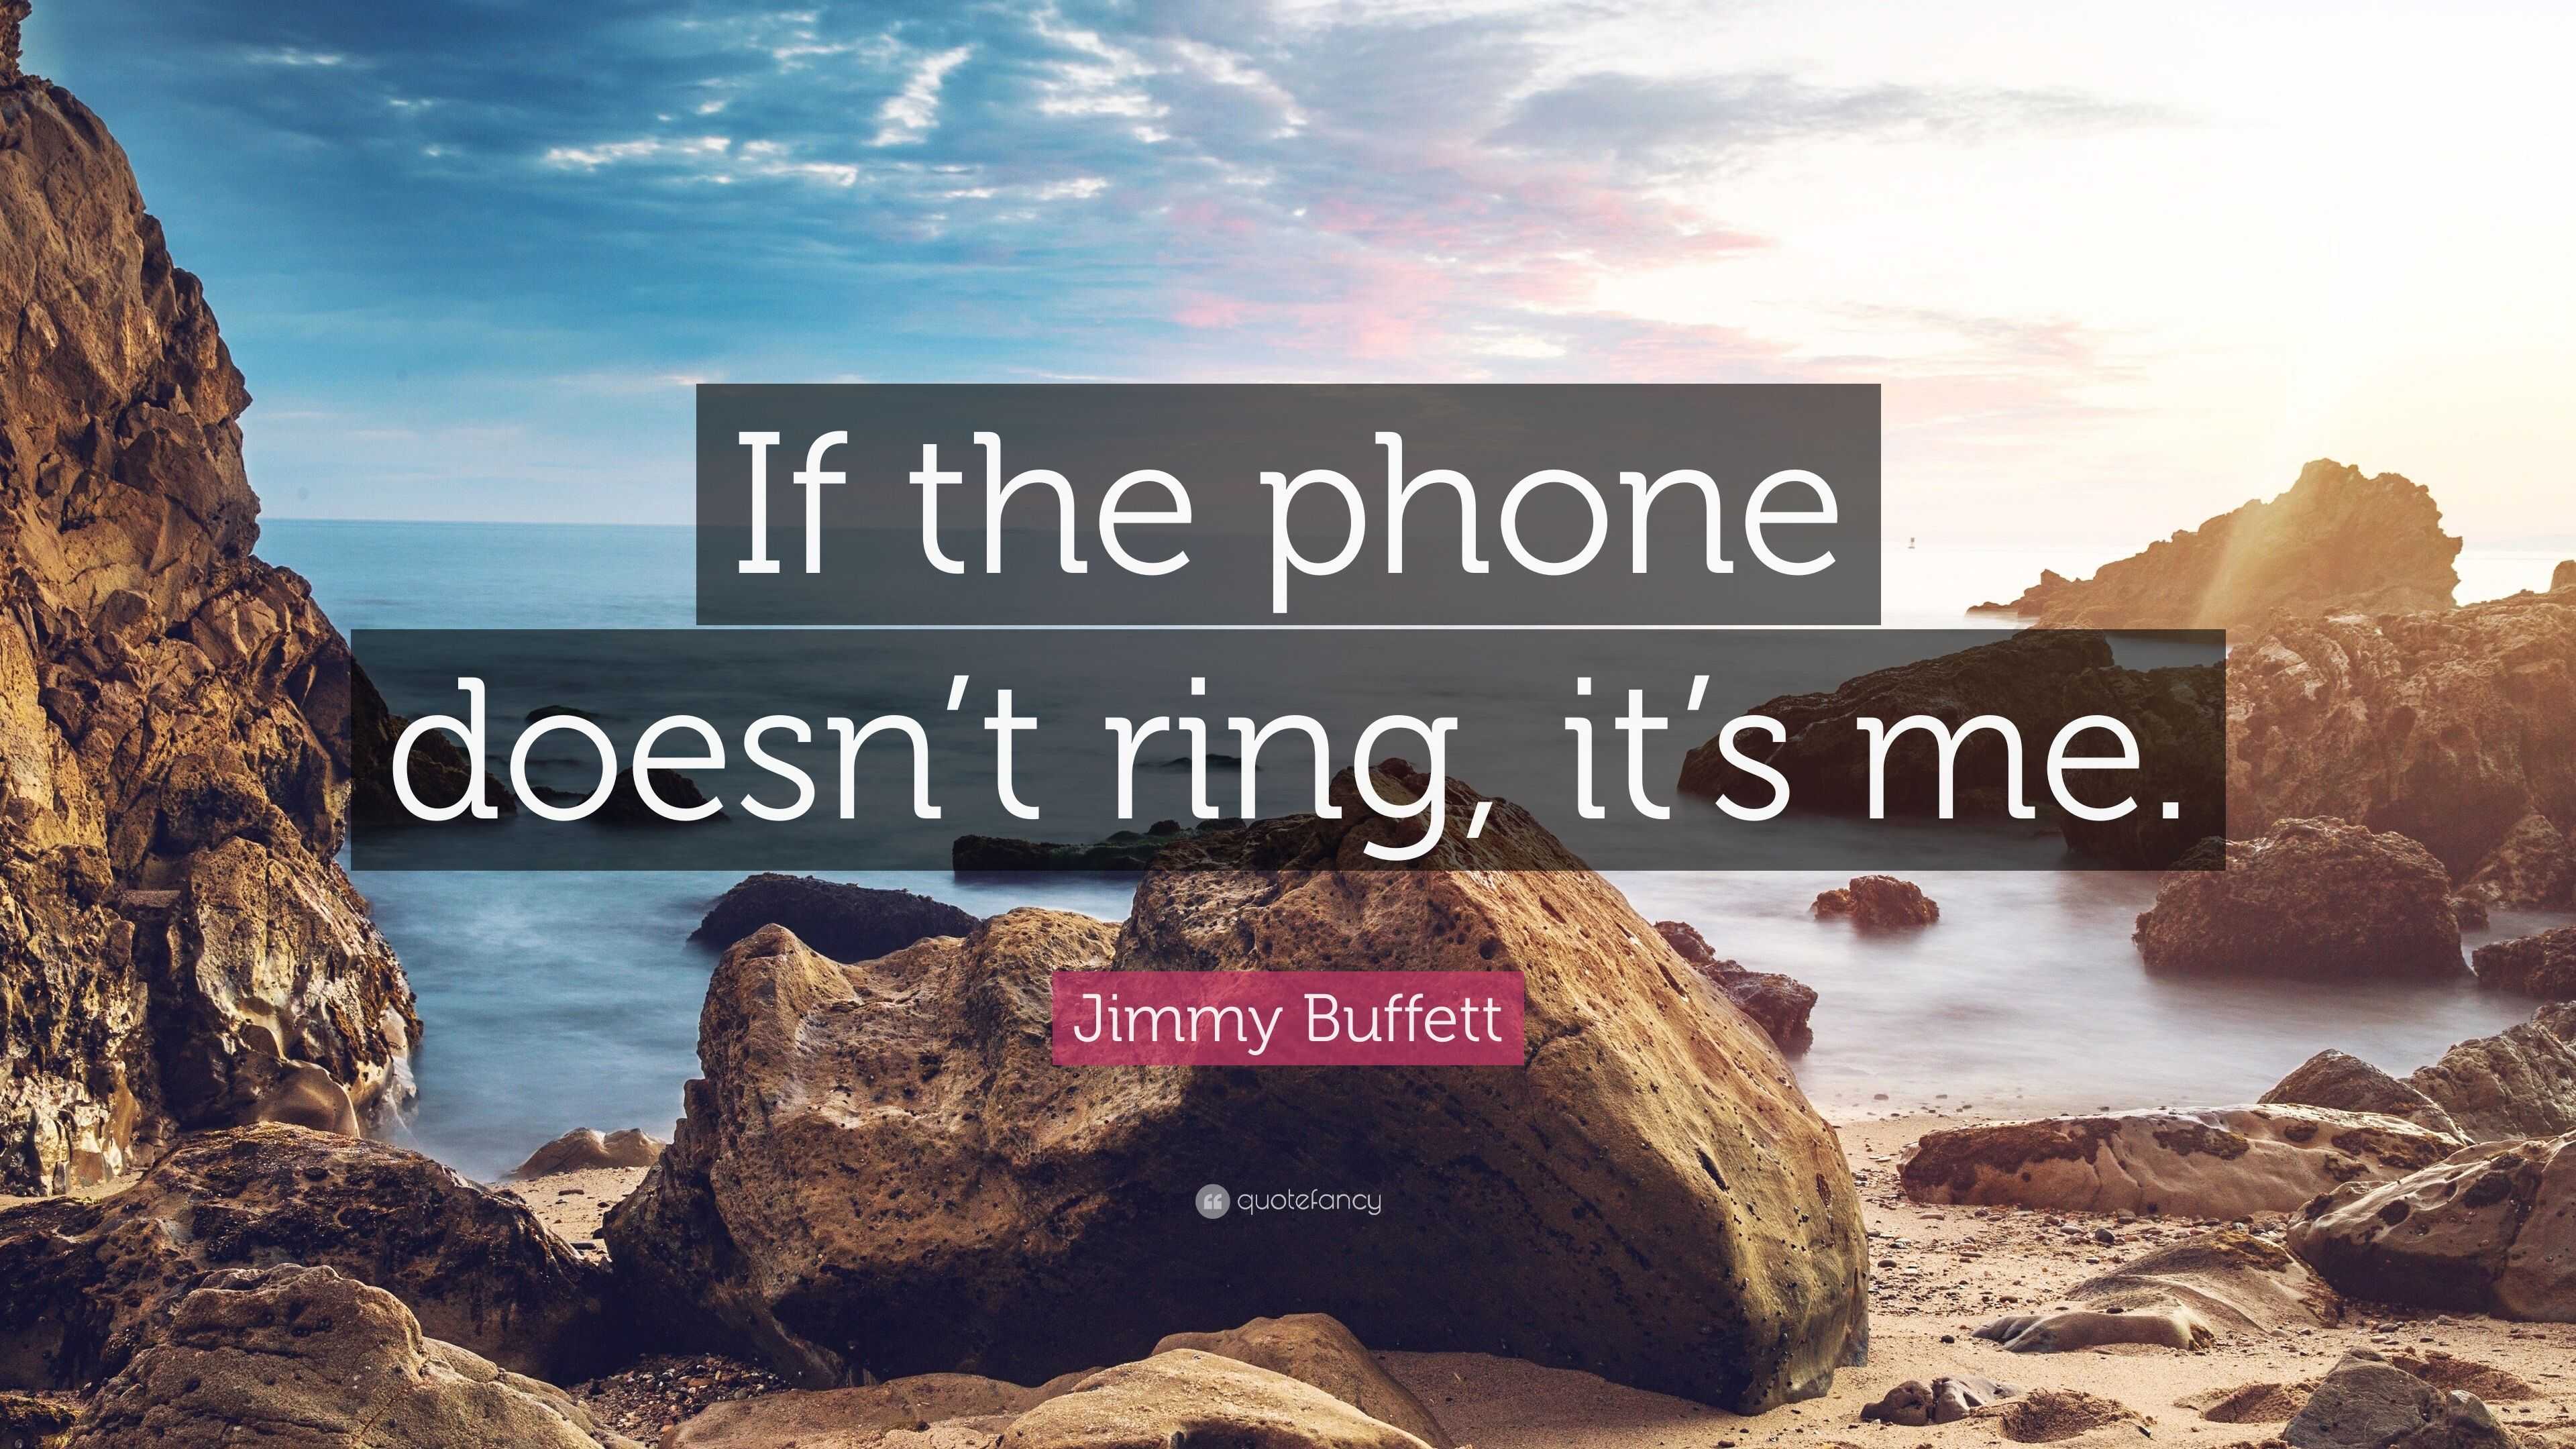 Jimmy Buffett - If The Phone Doesn't Ring, It's Me - 7